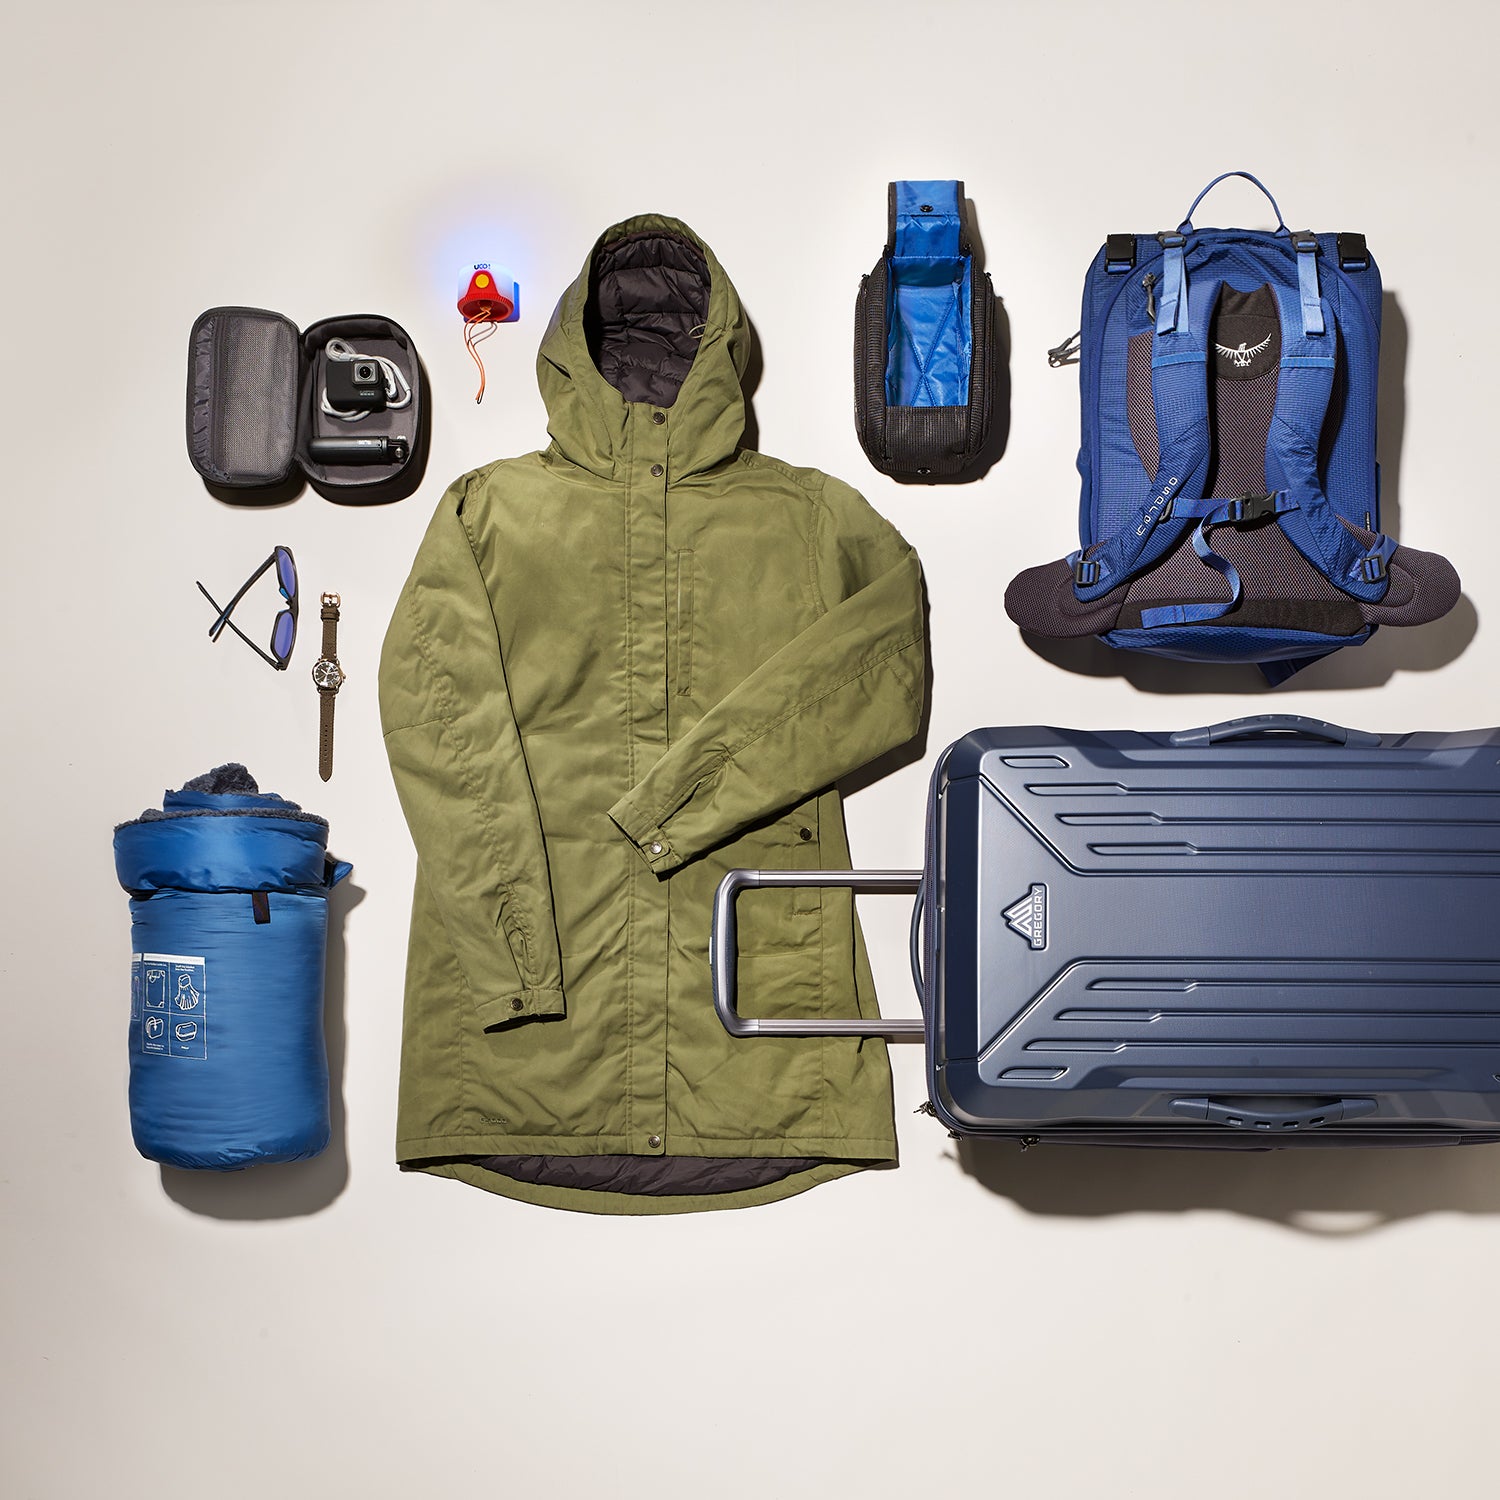 TSA Travel Lock – The Outfitters Adventure Gear and Apparel